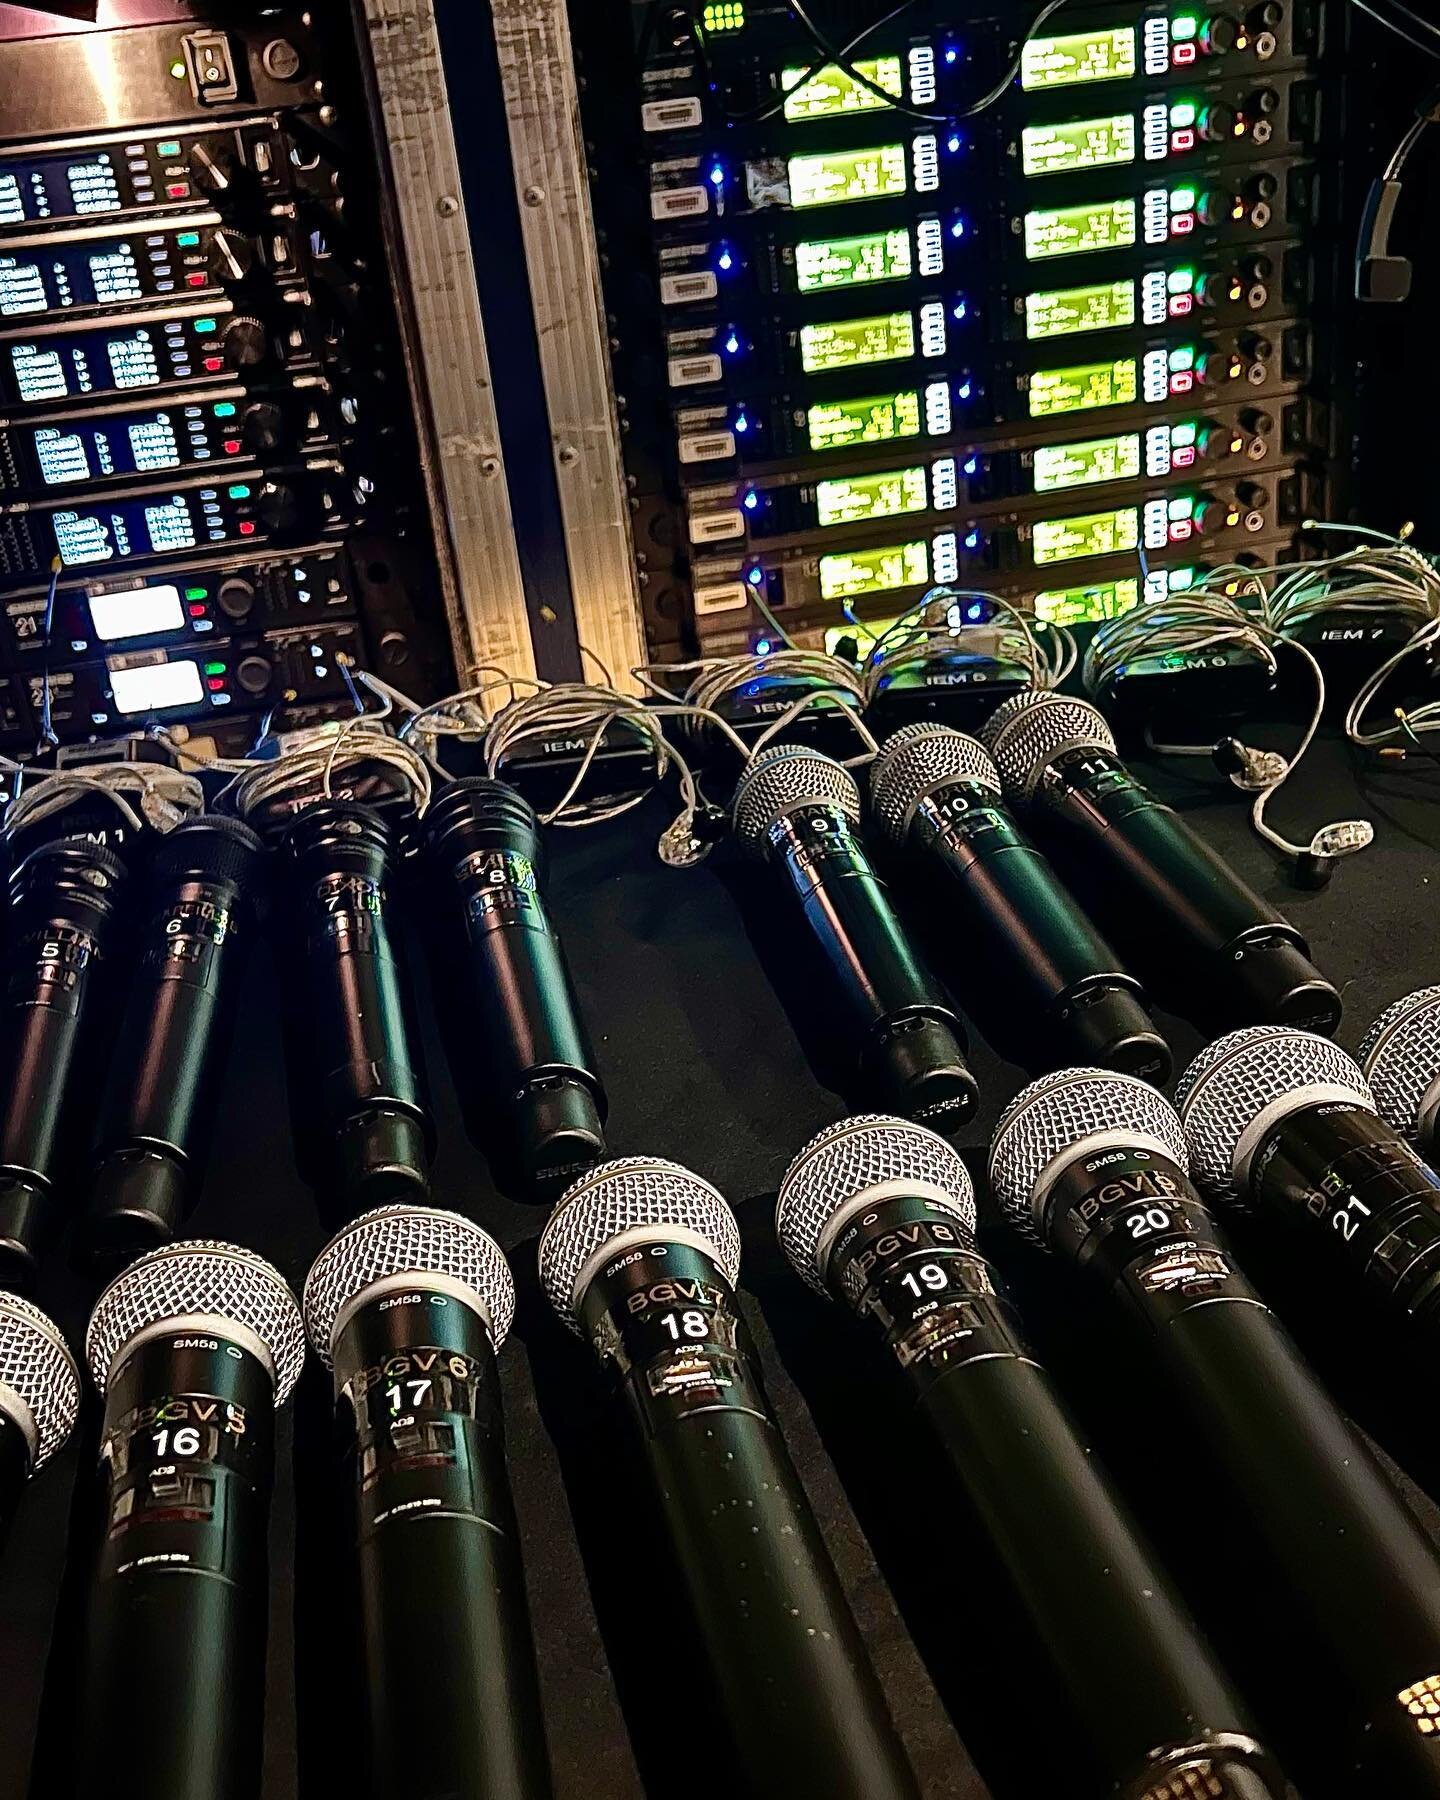 26 october 2022
david geffen hall, lincoln center, new york
⠀⠀⠀⠀⠀⠀⠀⠀⠀
handhelds on handhelds for the opening gala at the new david geffen hall. 
⠀⠀⠀⠀⠀⠀⠀⠀⠀
⠀⠀⠀⠀⠀⠀⠀⠀⠀
#davidgeffenhall #wutsaitheater #lincolncenter #newyorkcity #iatse #localone #stageha